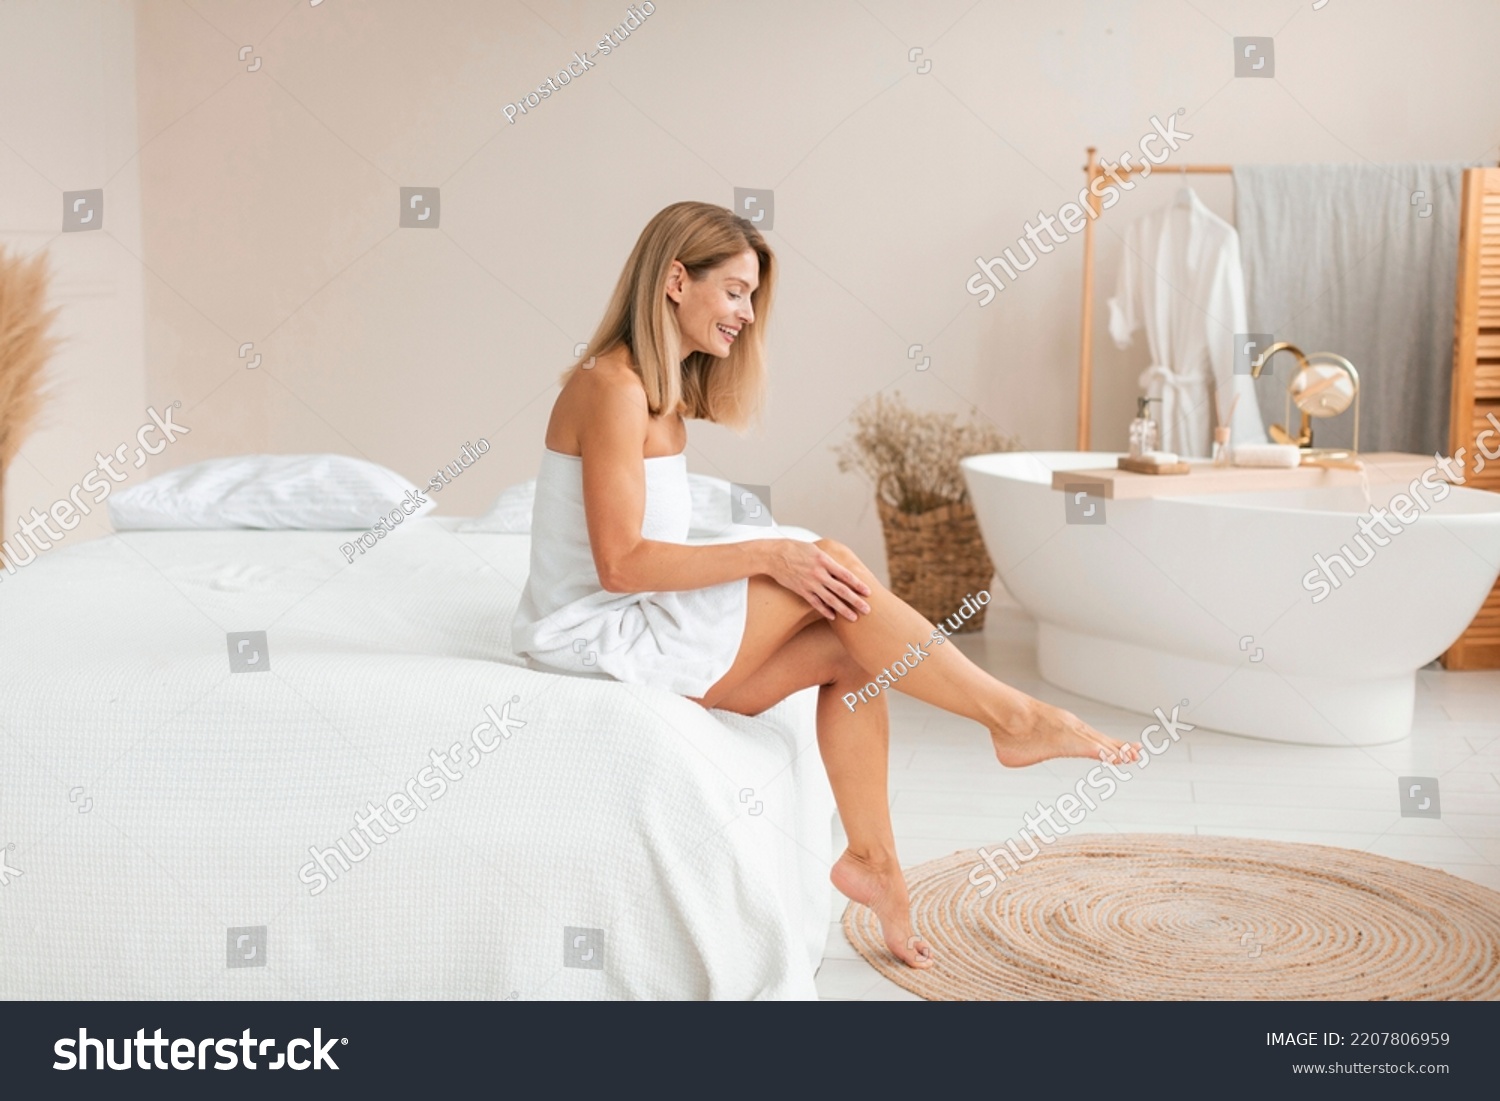 Beautiful middle aged woman in towel touching her leg with soft skin after depilation, sitting on bed at home, copy space. Mature lady after hair removal procedure, full length #2207806959